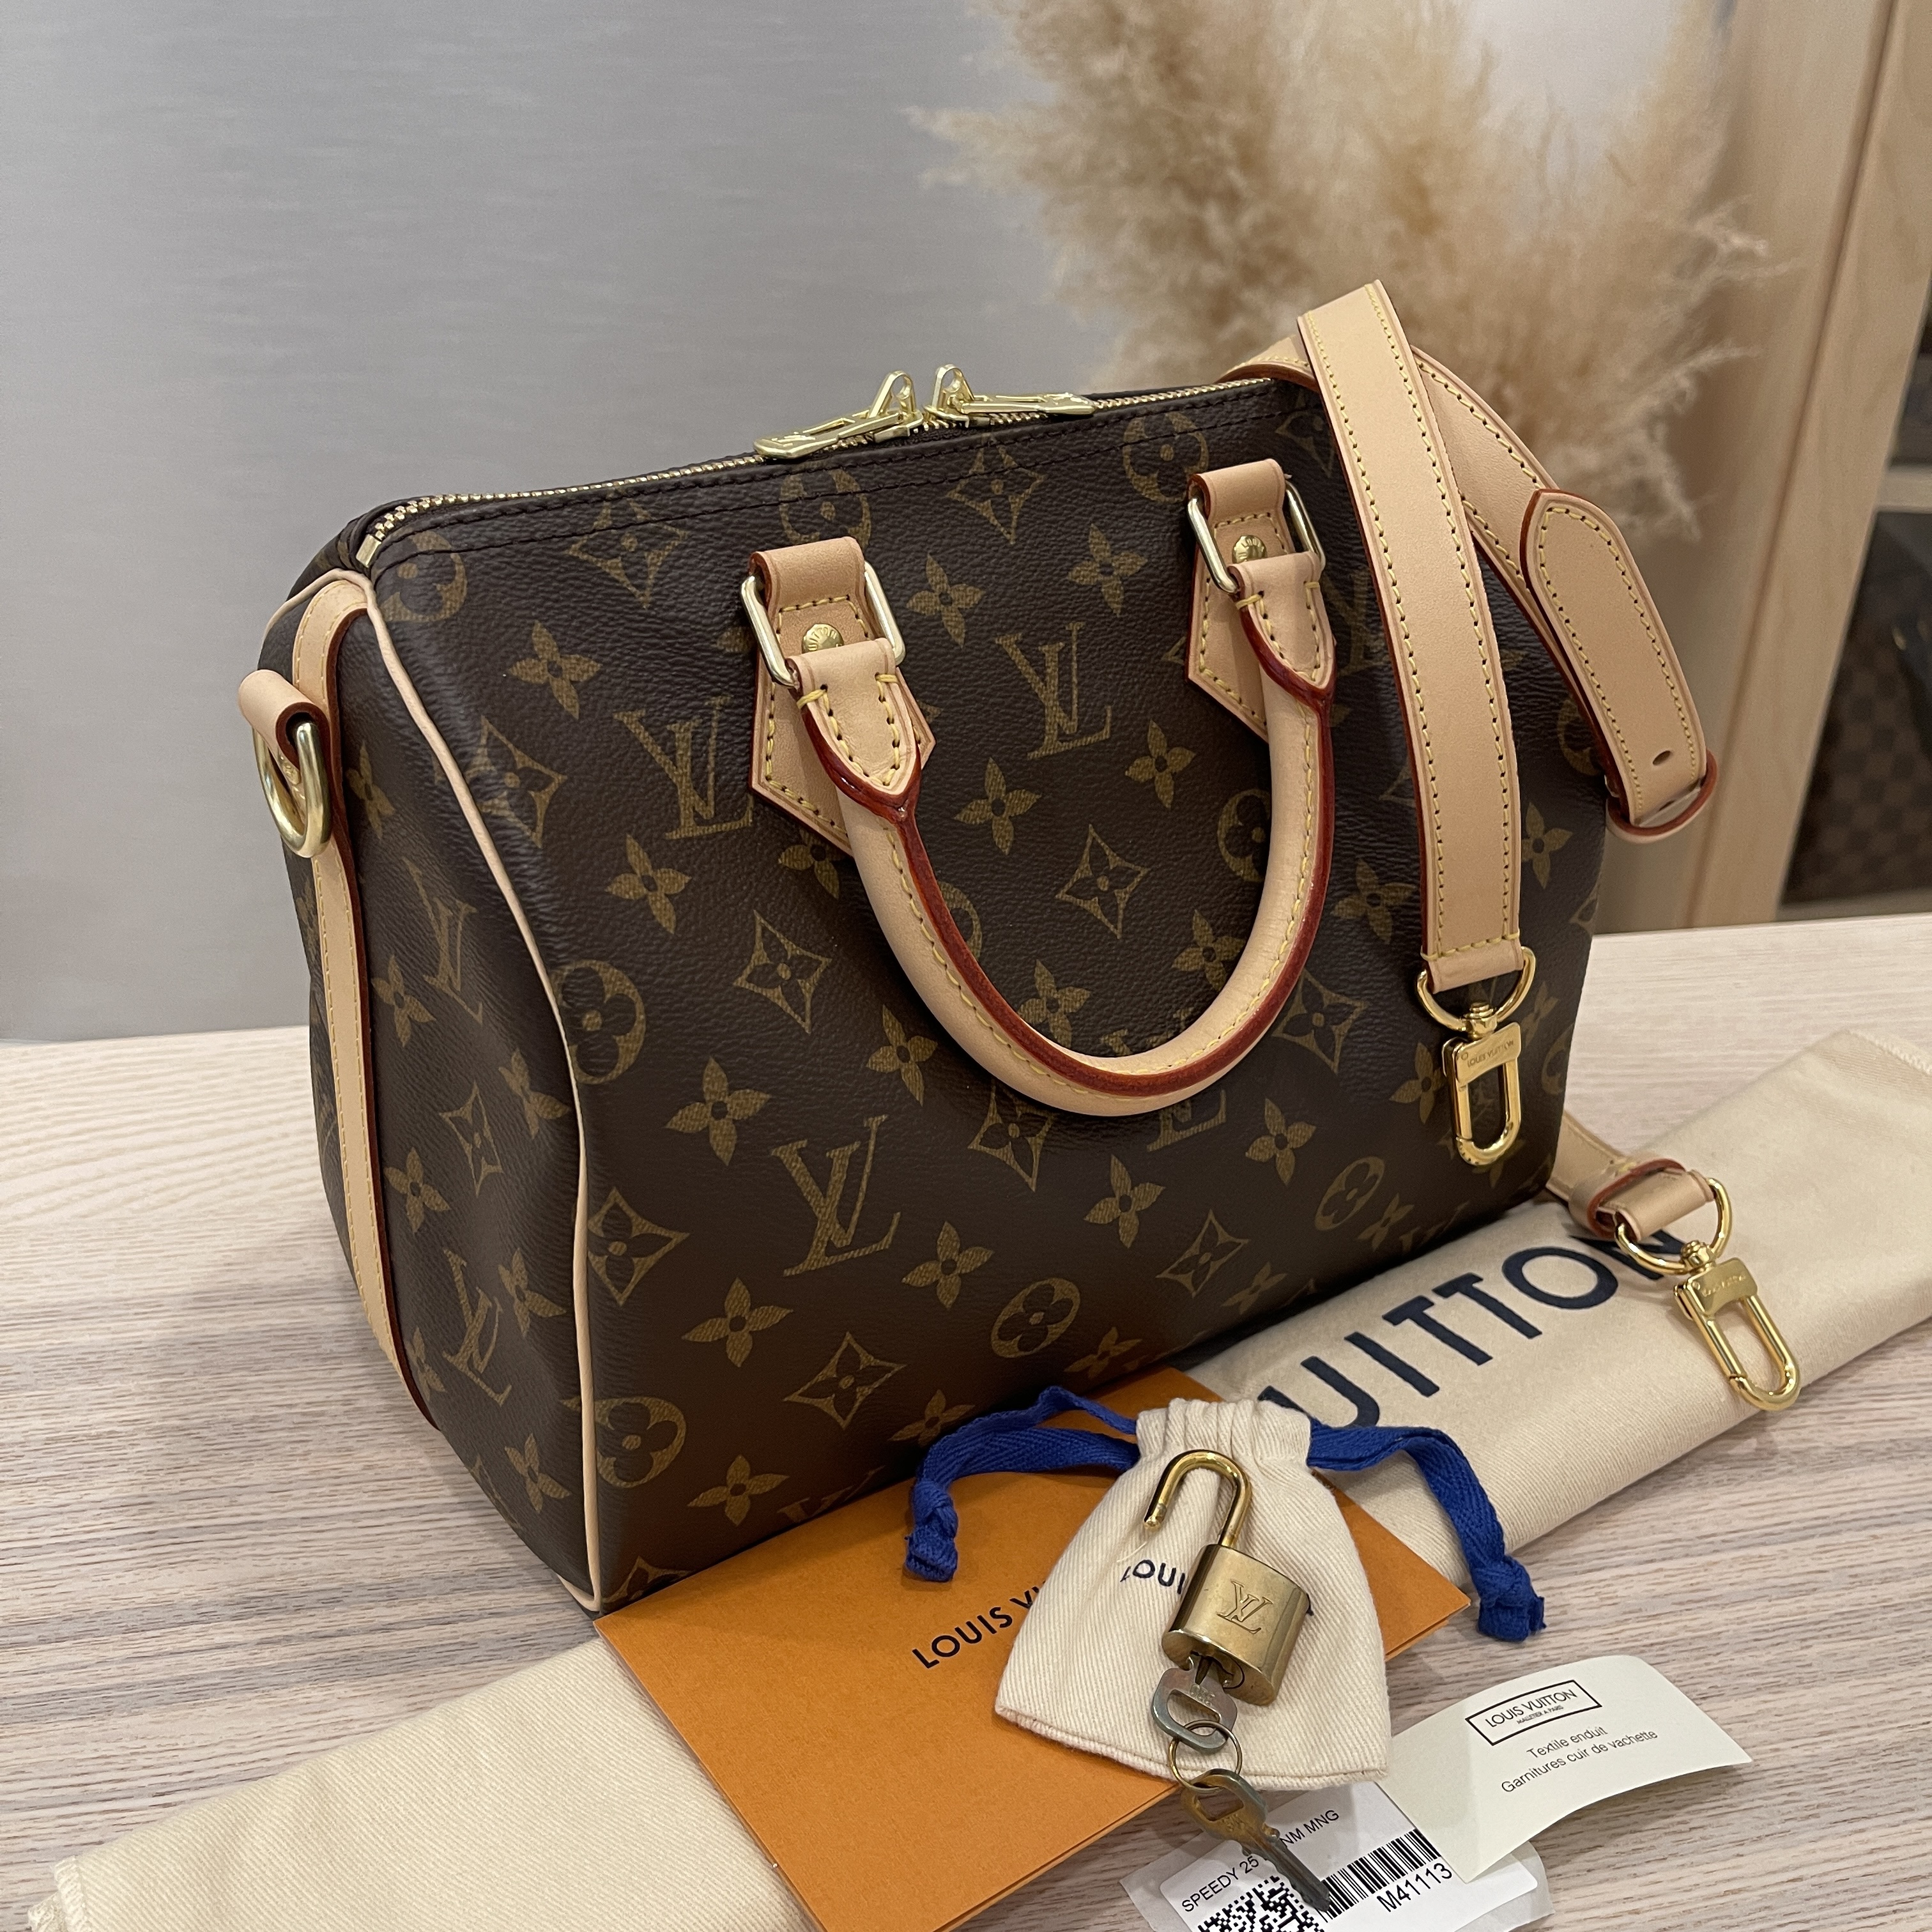 Louis Vuitton speedy 25 monogram with dust bag and base shaper - $620 -  From Amanda